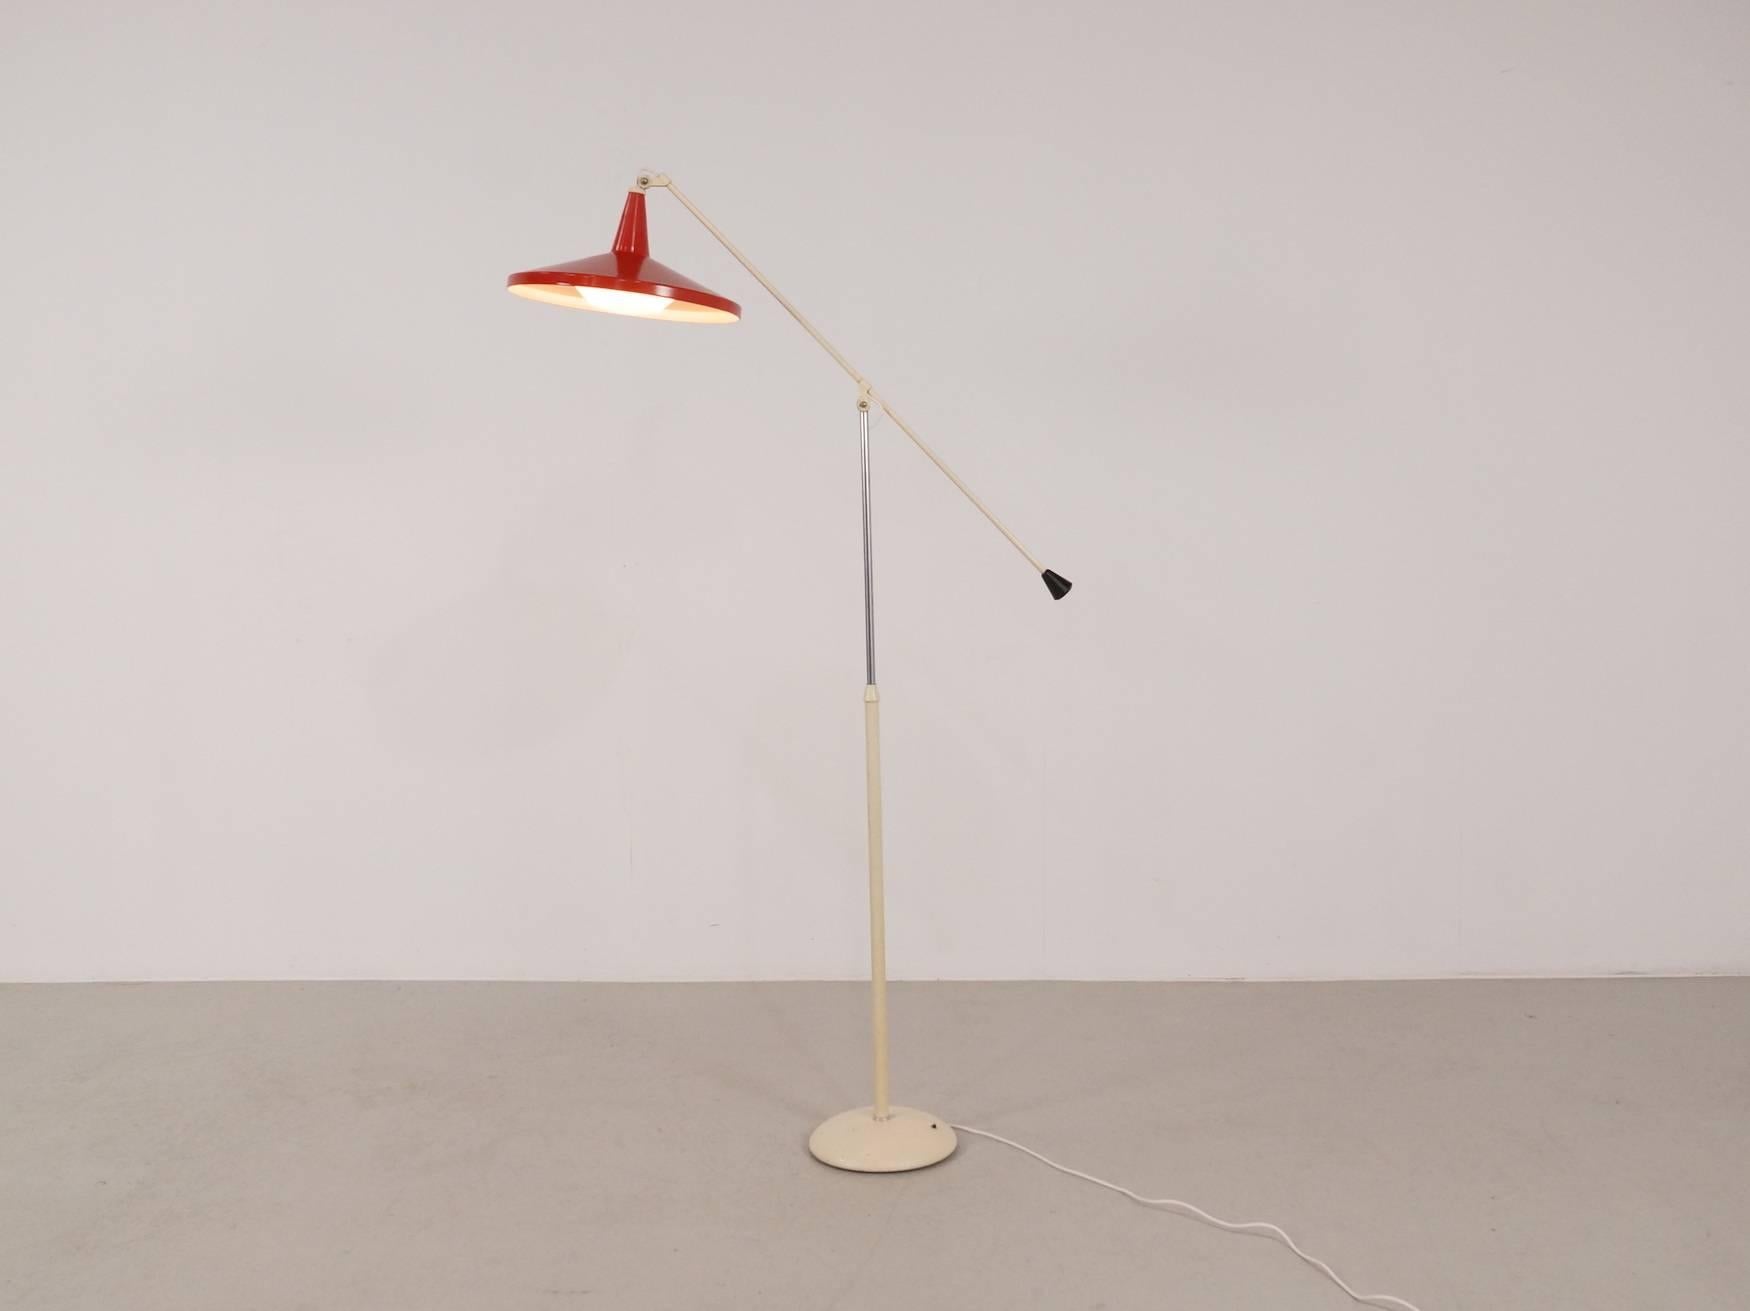 Beautiful white and red Industrial floor lamp, designed by Wim Rietveld ( son of Wim Rietveld ) in 1955 for Gispen. This floor lamp has a white height adjustable arm. The shade has the original red lacquer and the lamp comes with a new diffuser, the